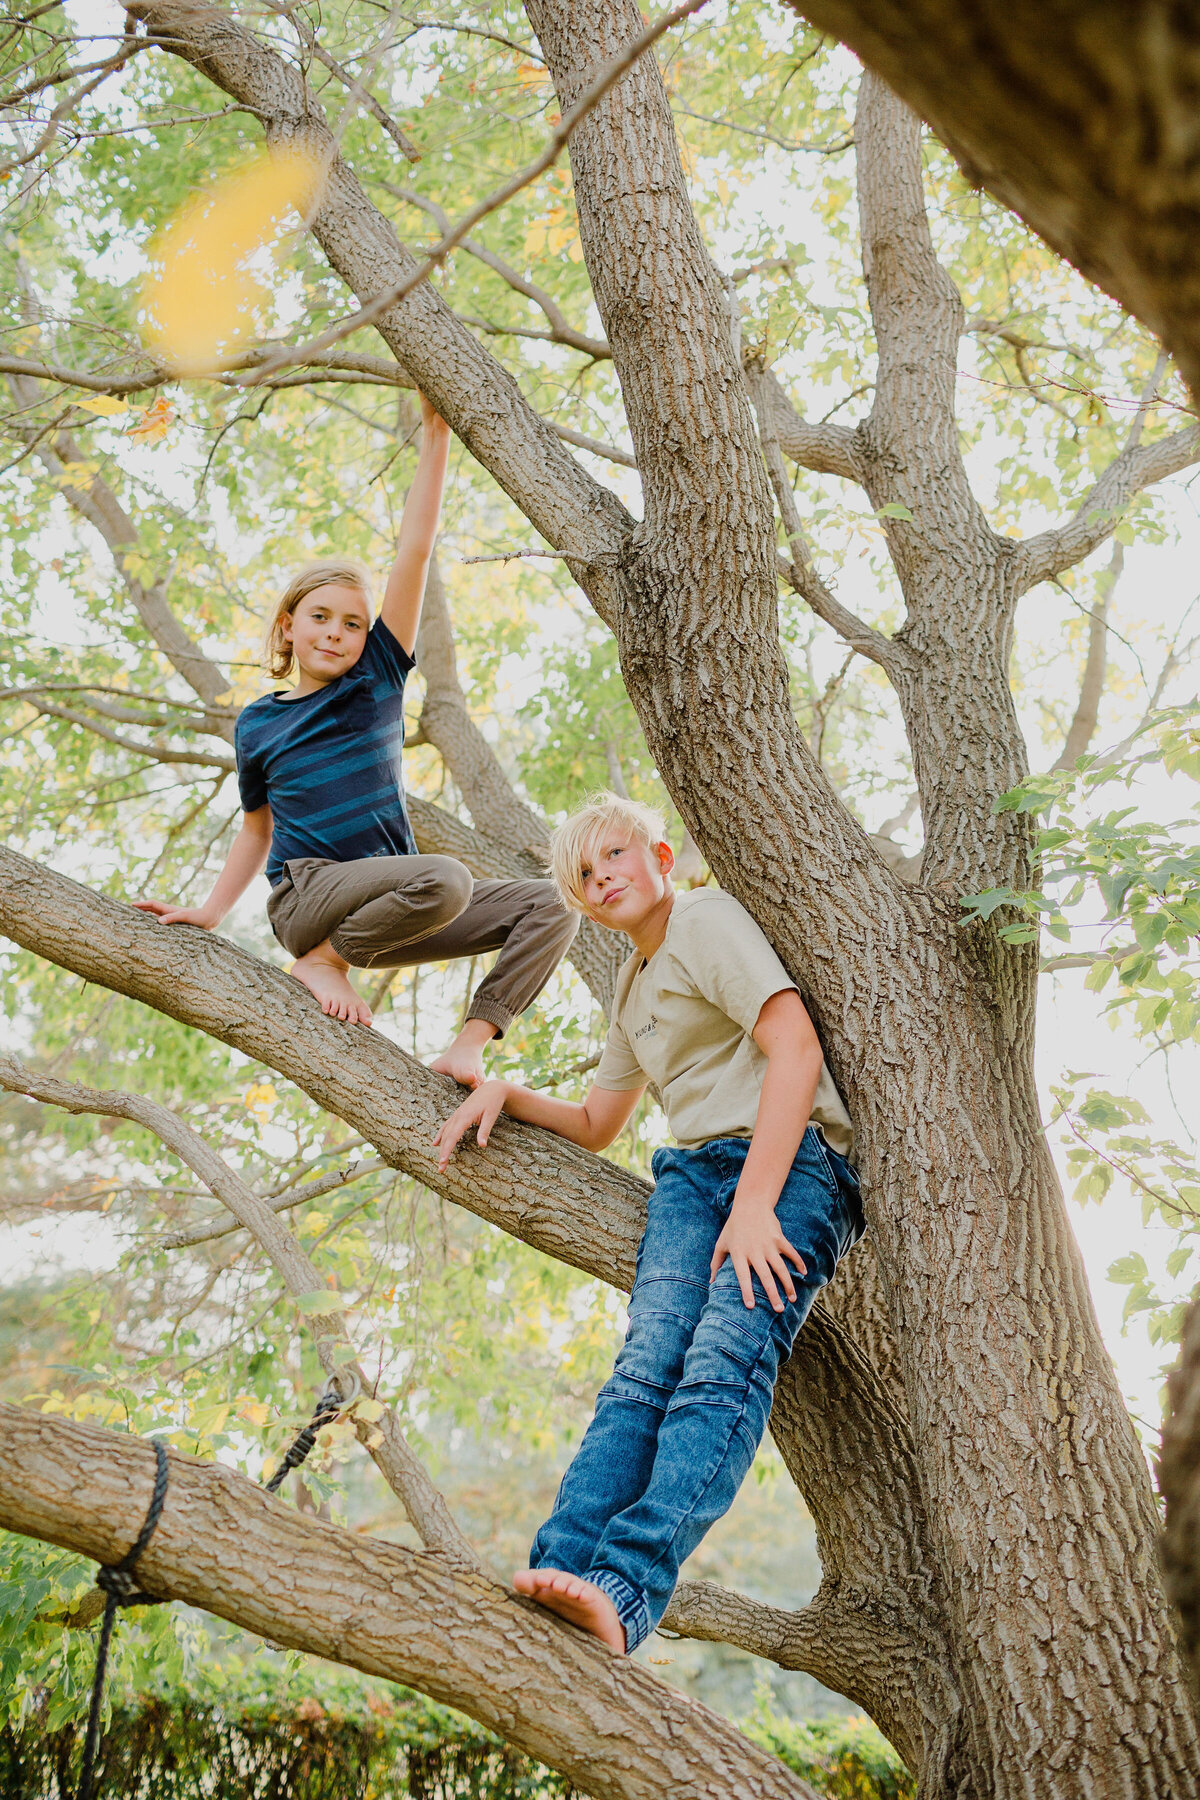 Climbing trees barefoot and wild